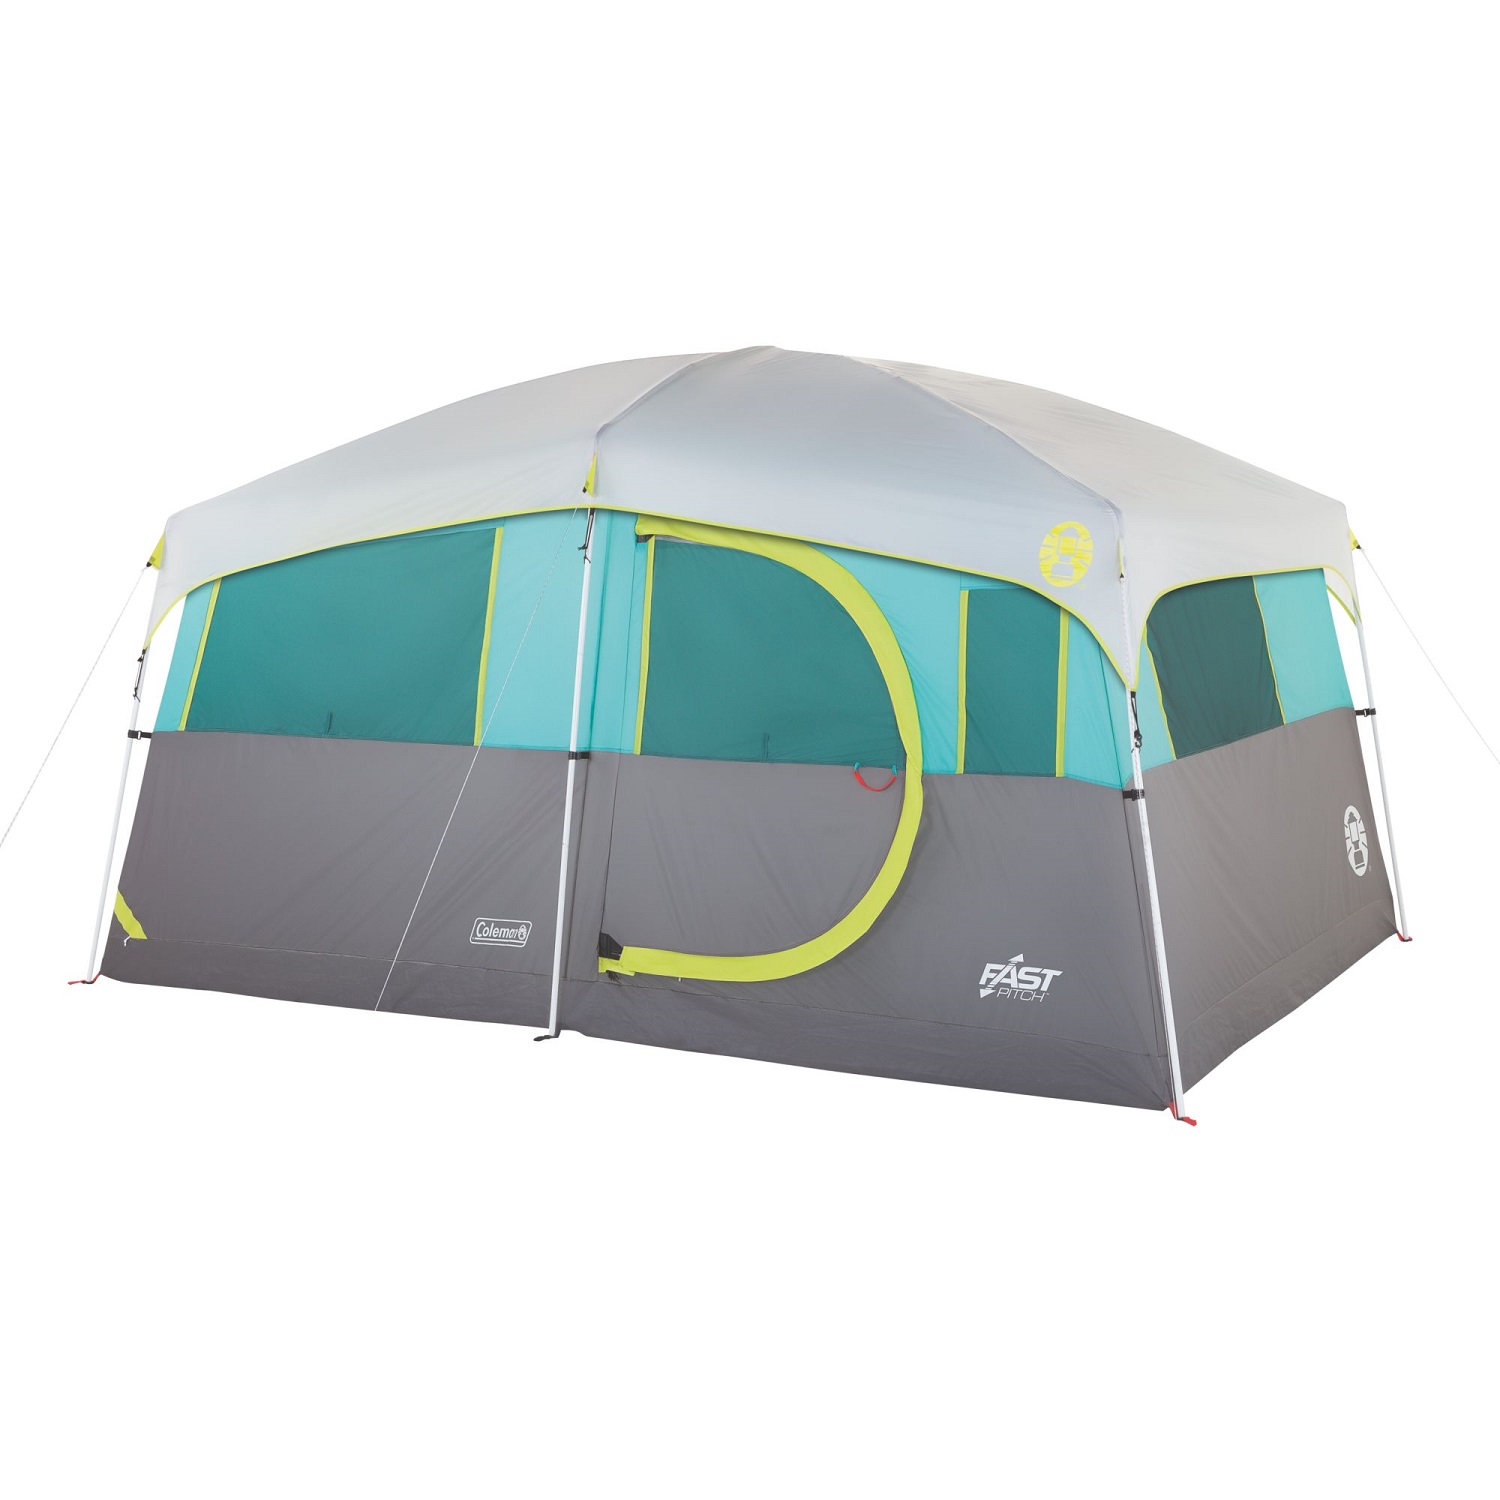 Coleman Tenaya Lake 8 Person Lighted Fast Pitch Cabin Tent, 1 Room, Teal - image 1 of 5